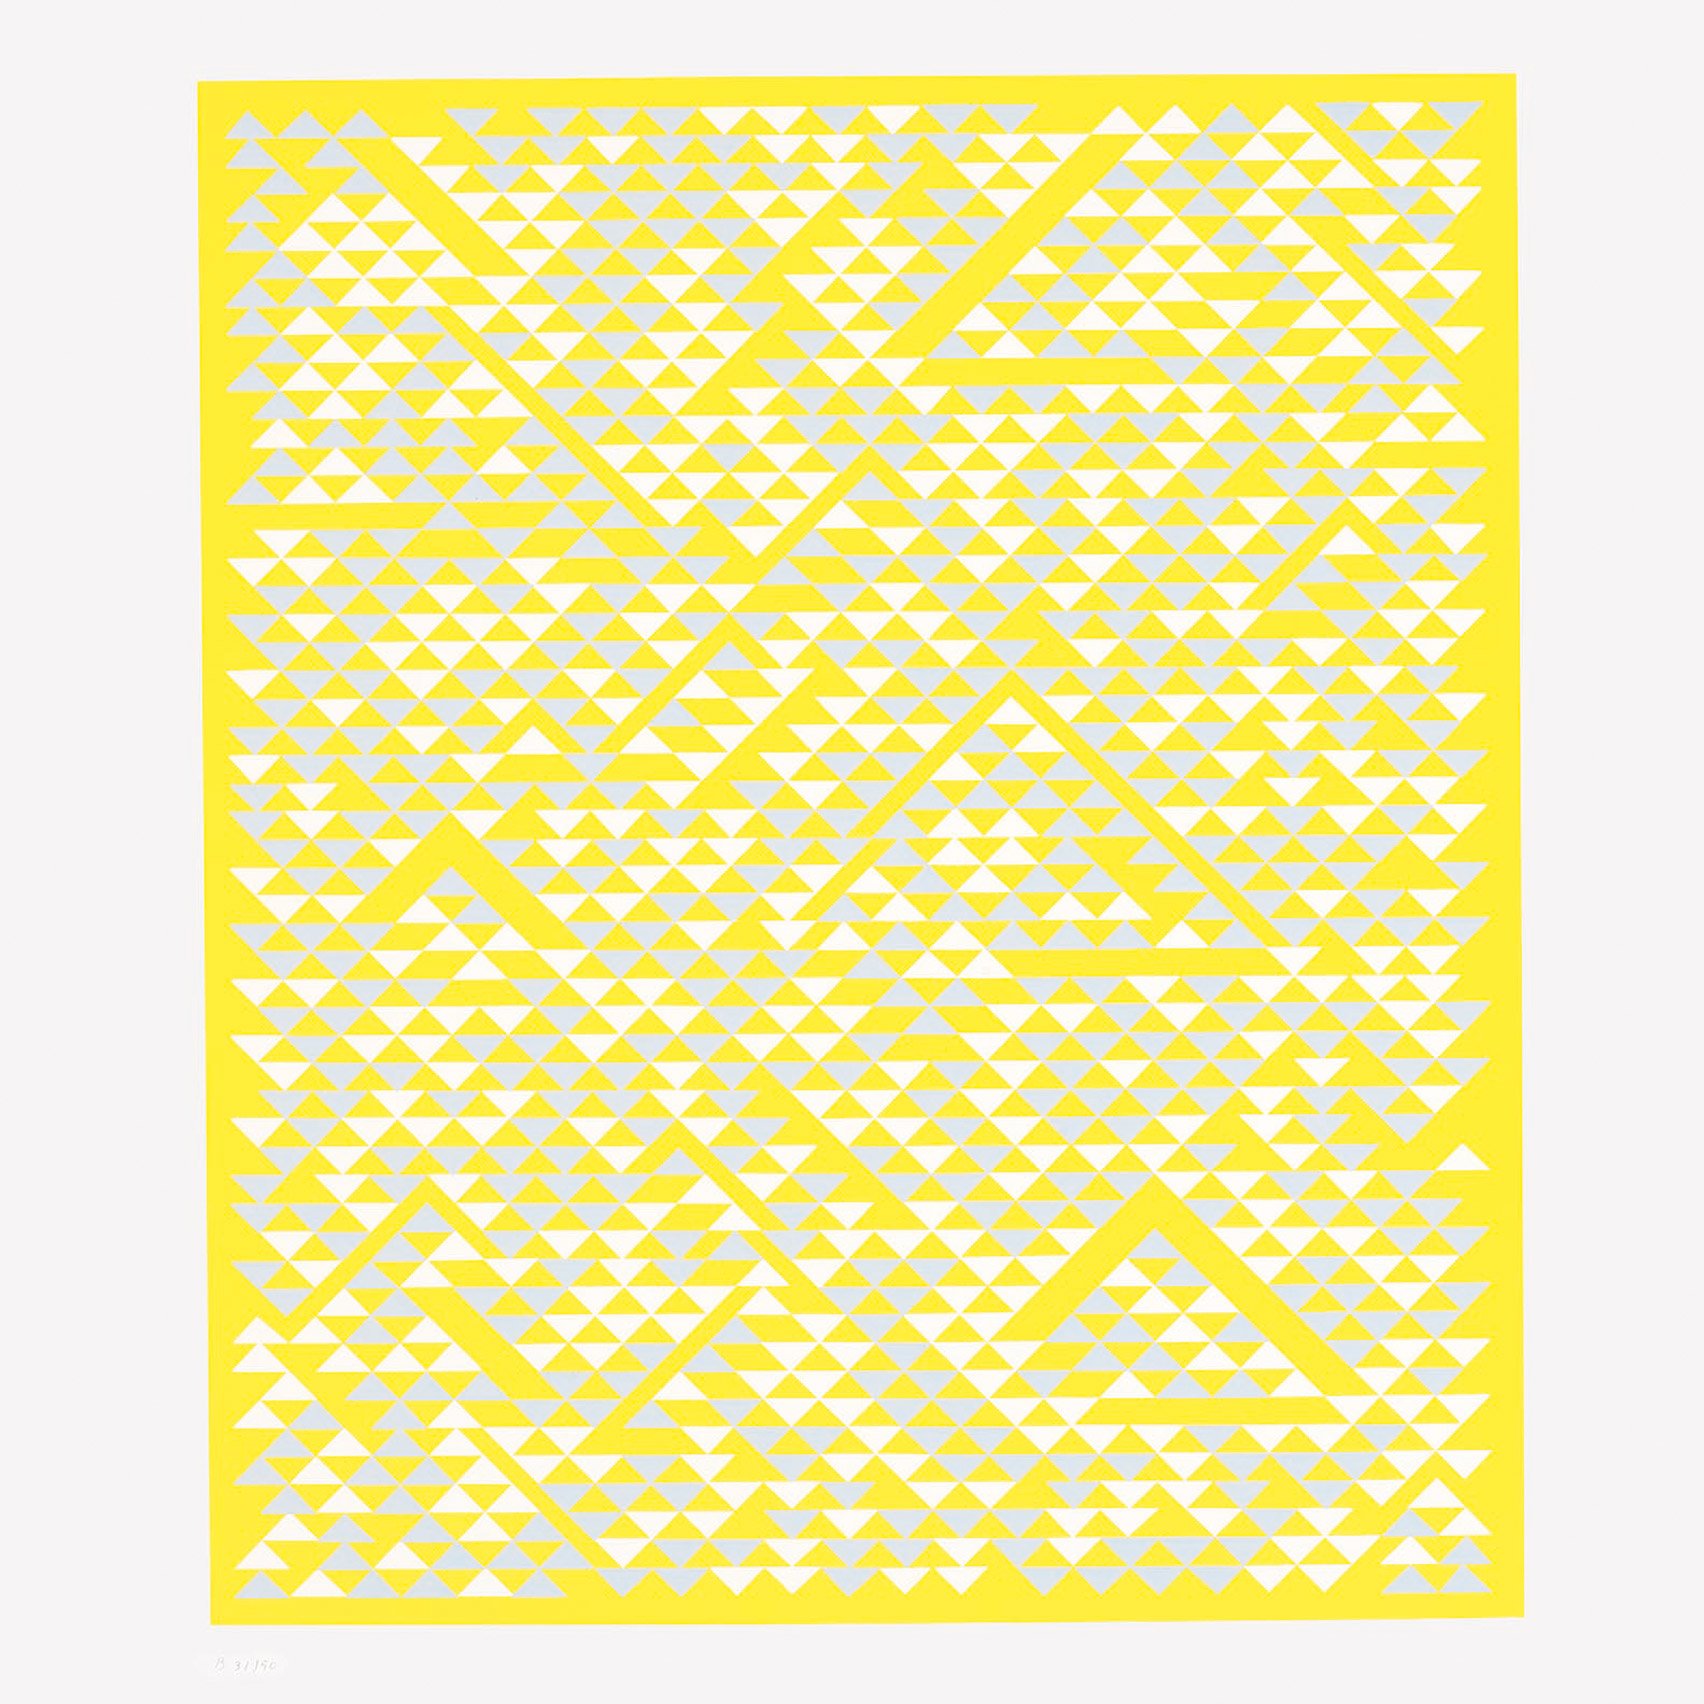 B by Anni Albers, 1968, Picture credit: copyright © 2020 The Josef and Anni Albers Foundation/Artists Rights Society (ARS), New York/DACS, London / Photo: Tim Nighswander/Imaging4Art (page 408)